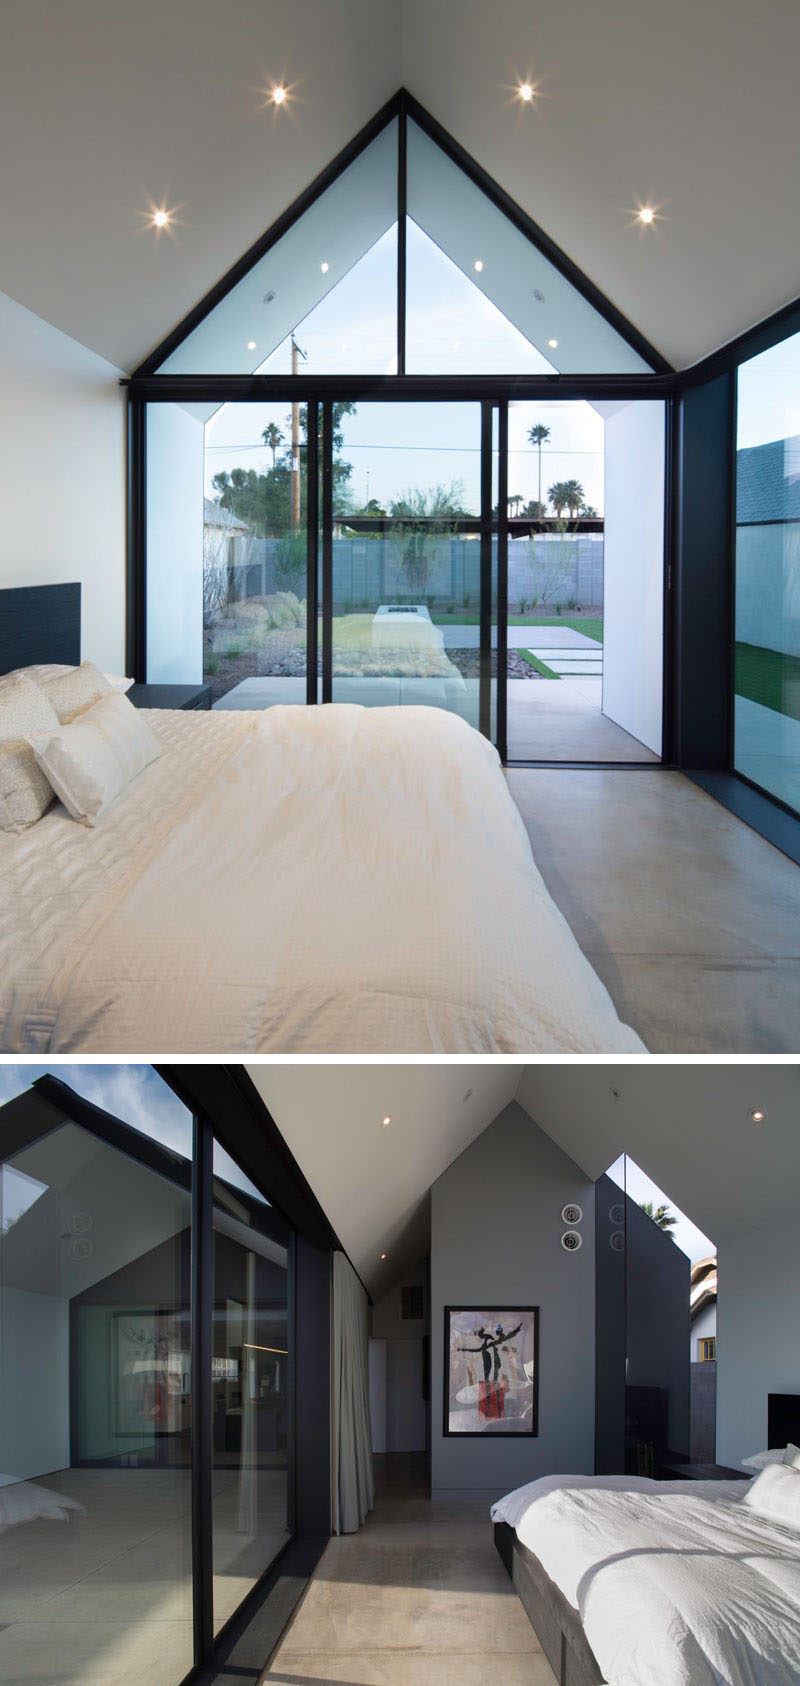 In this master bedroom, windows follow the line of the roof and provide a view of the backyard.